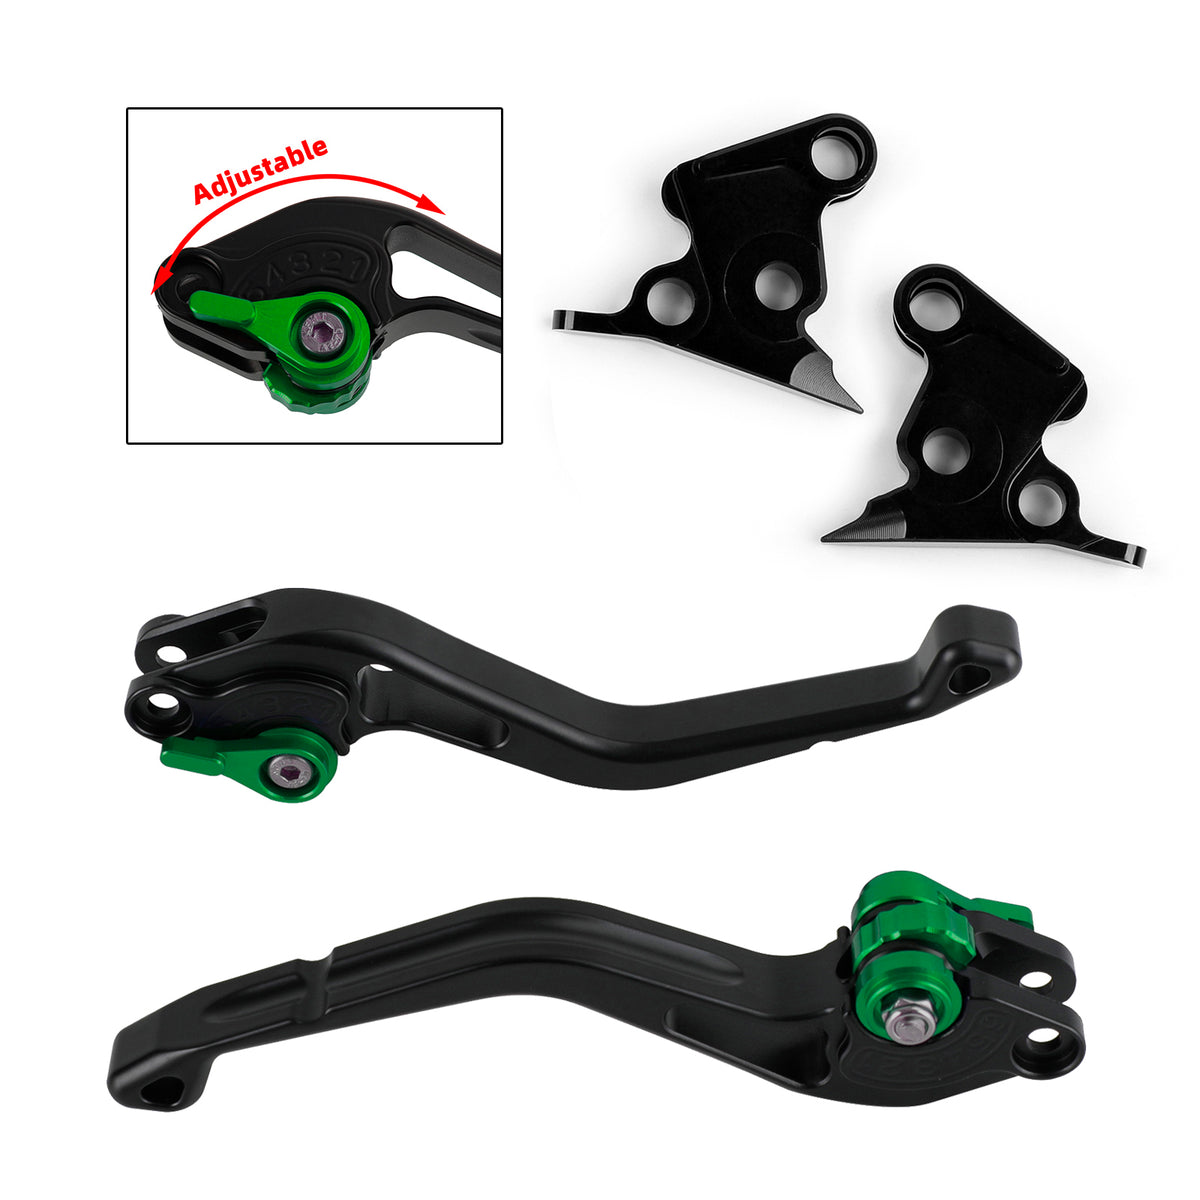 NEW Short Clutch Brake Lever fit for Ducati 996/998/B/S/R M900/M1000 MTS1100